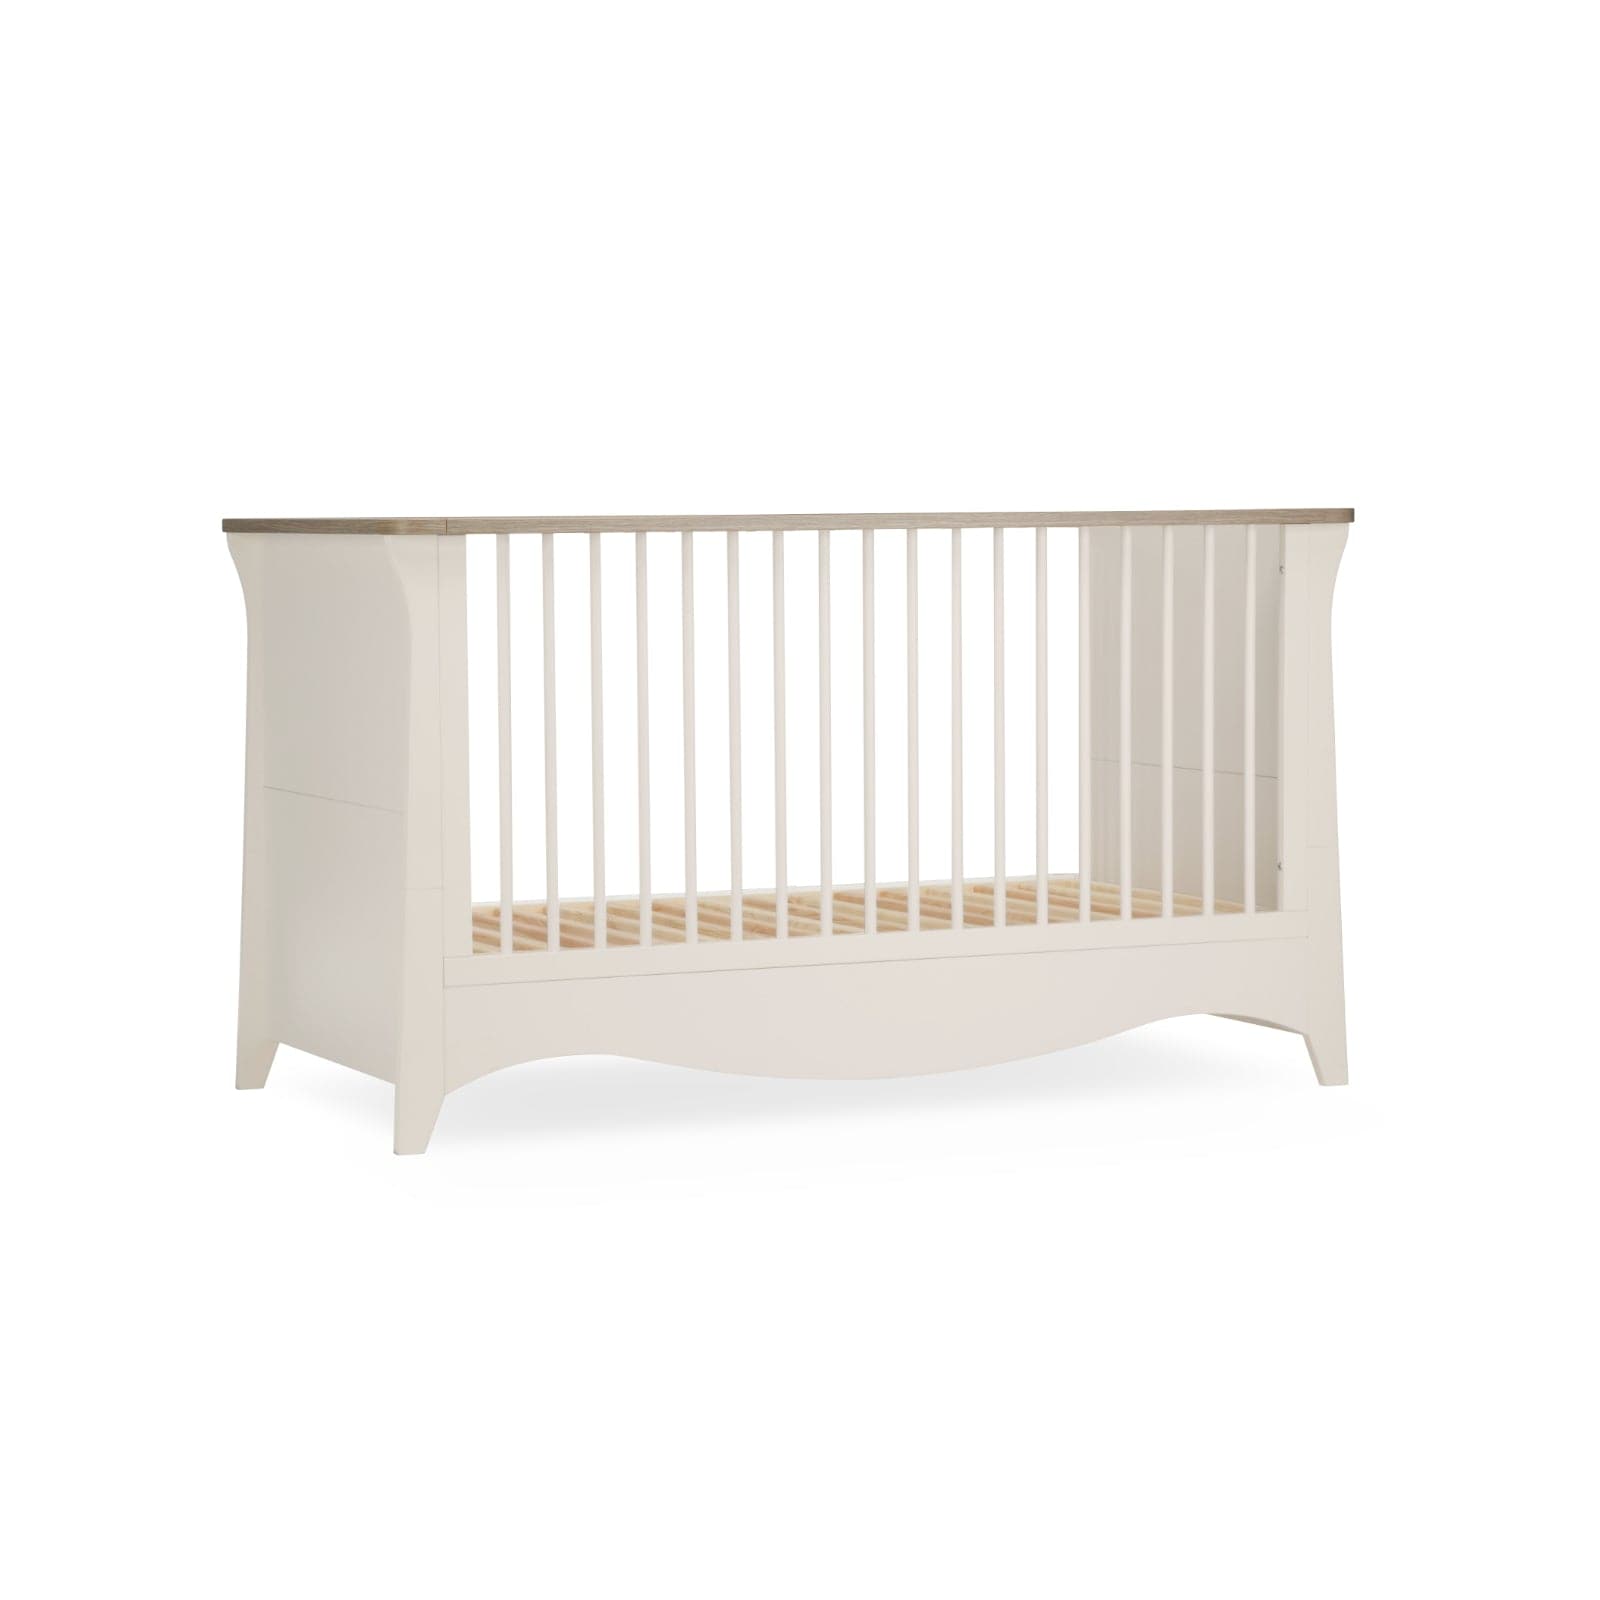 CuddleCo baby cot beds CuddleCo Clara Cot Bed - Cashmere